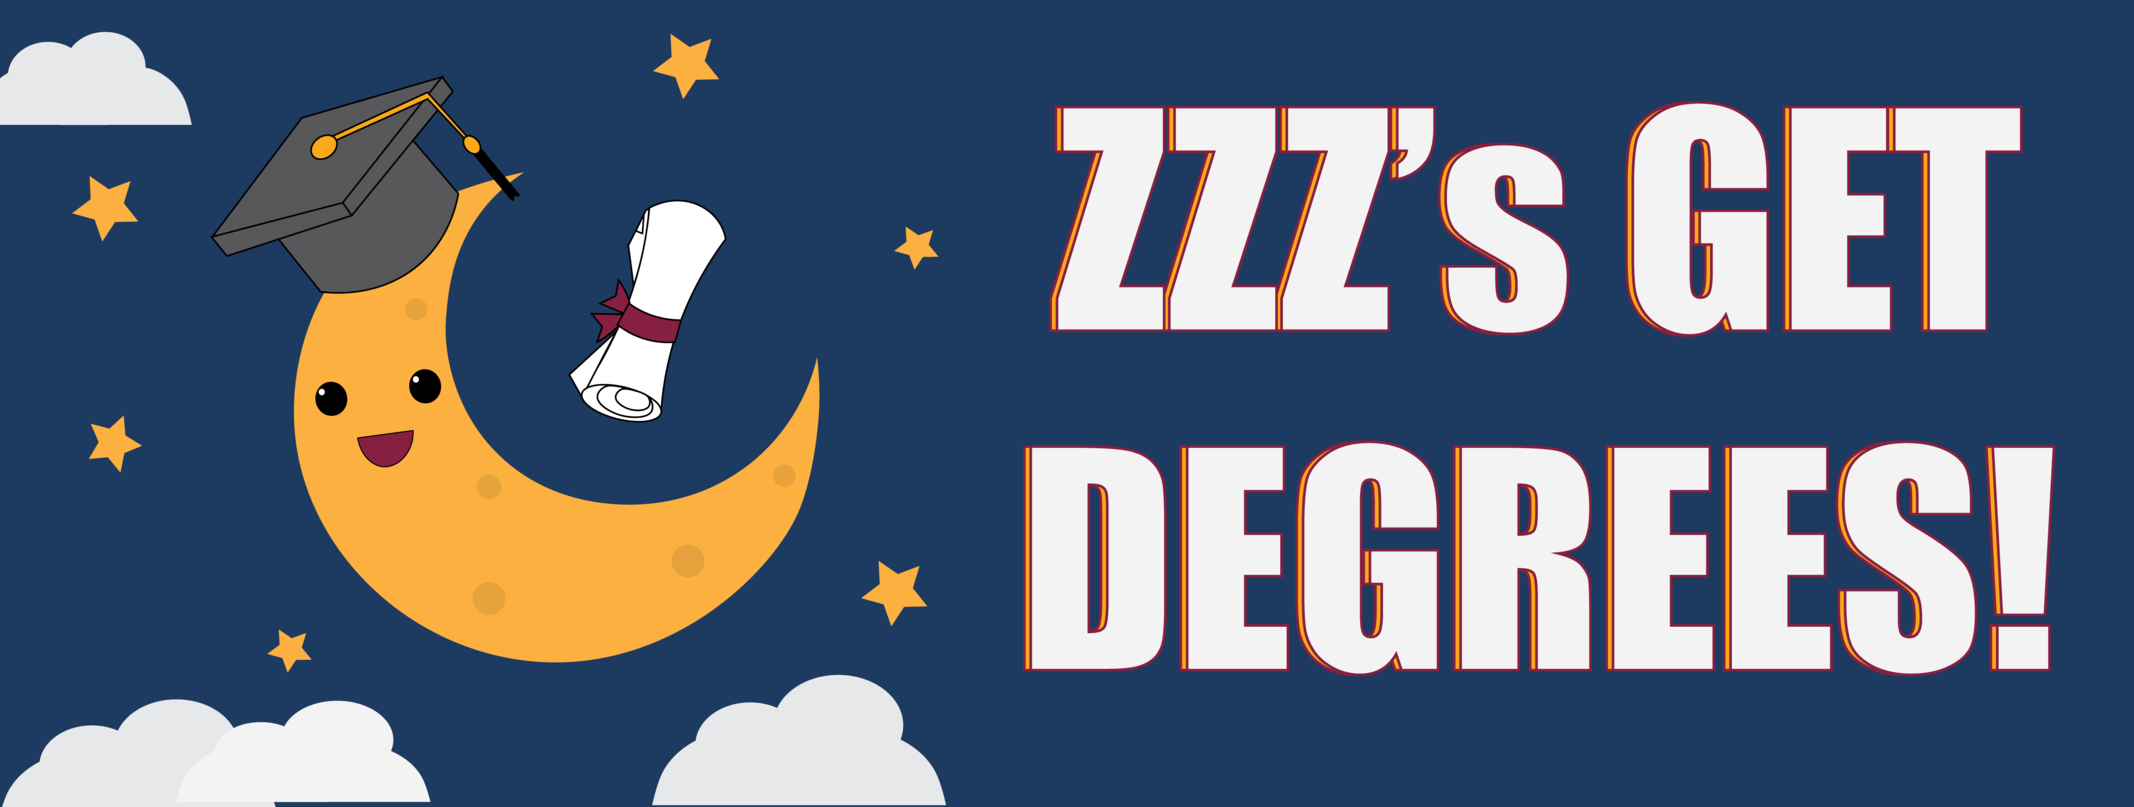 ZZZ's Get Degrees